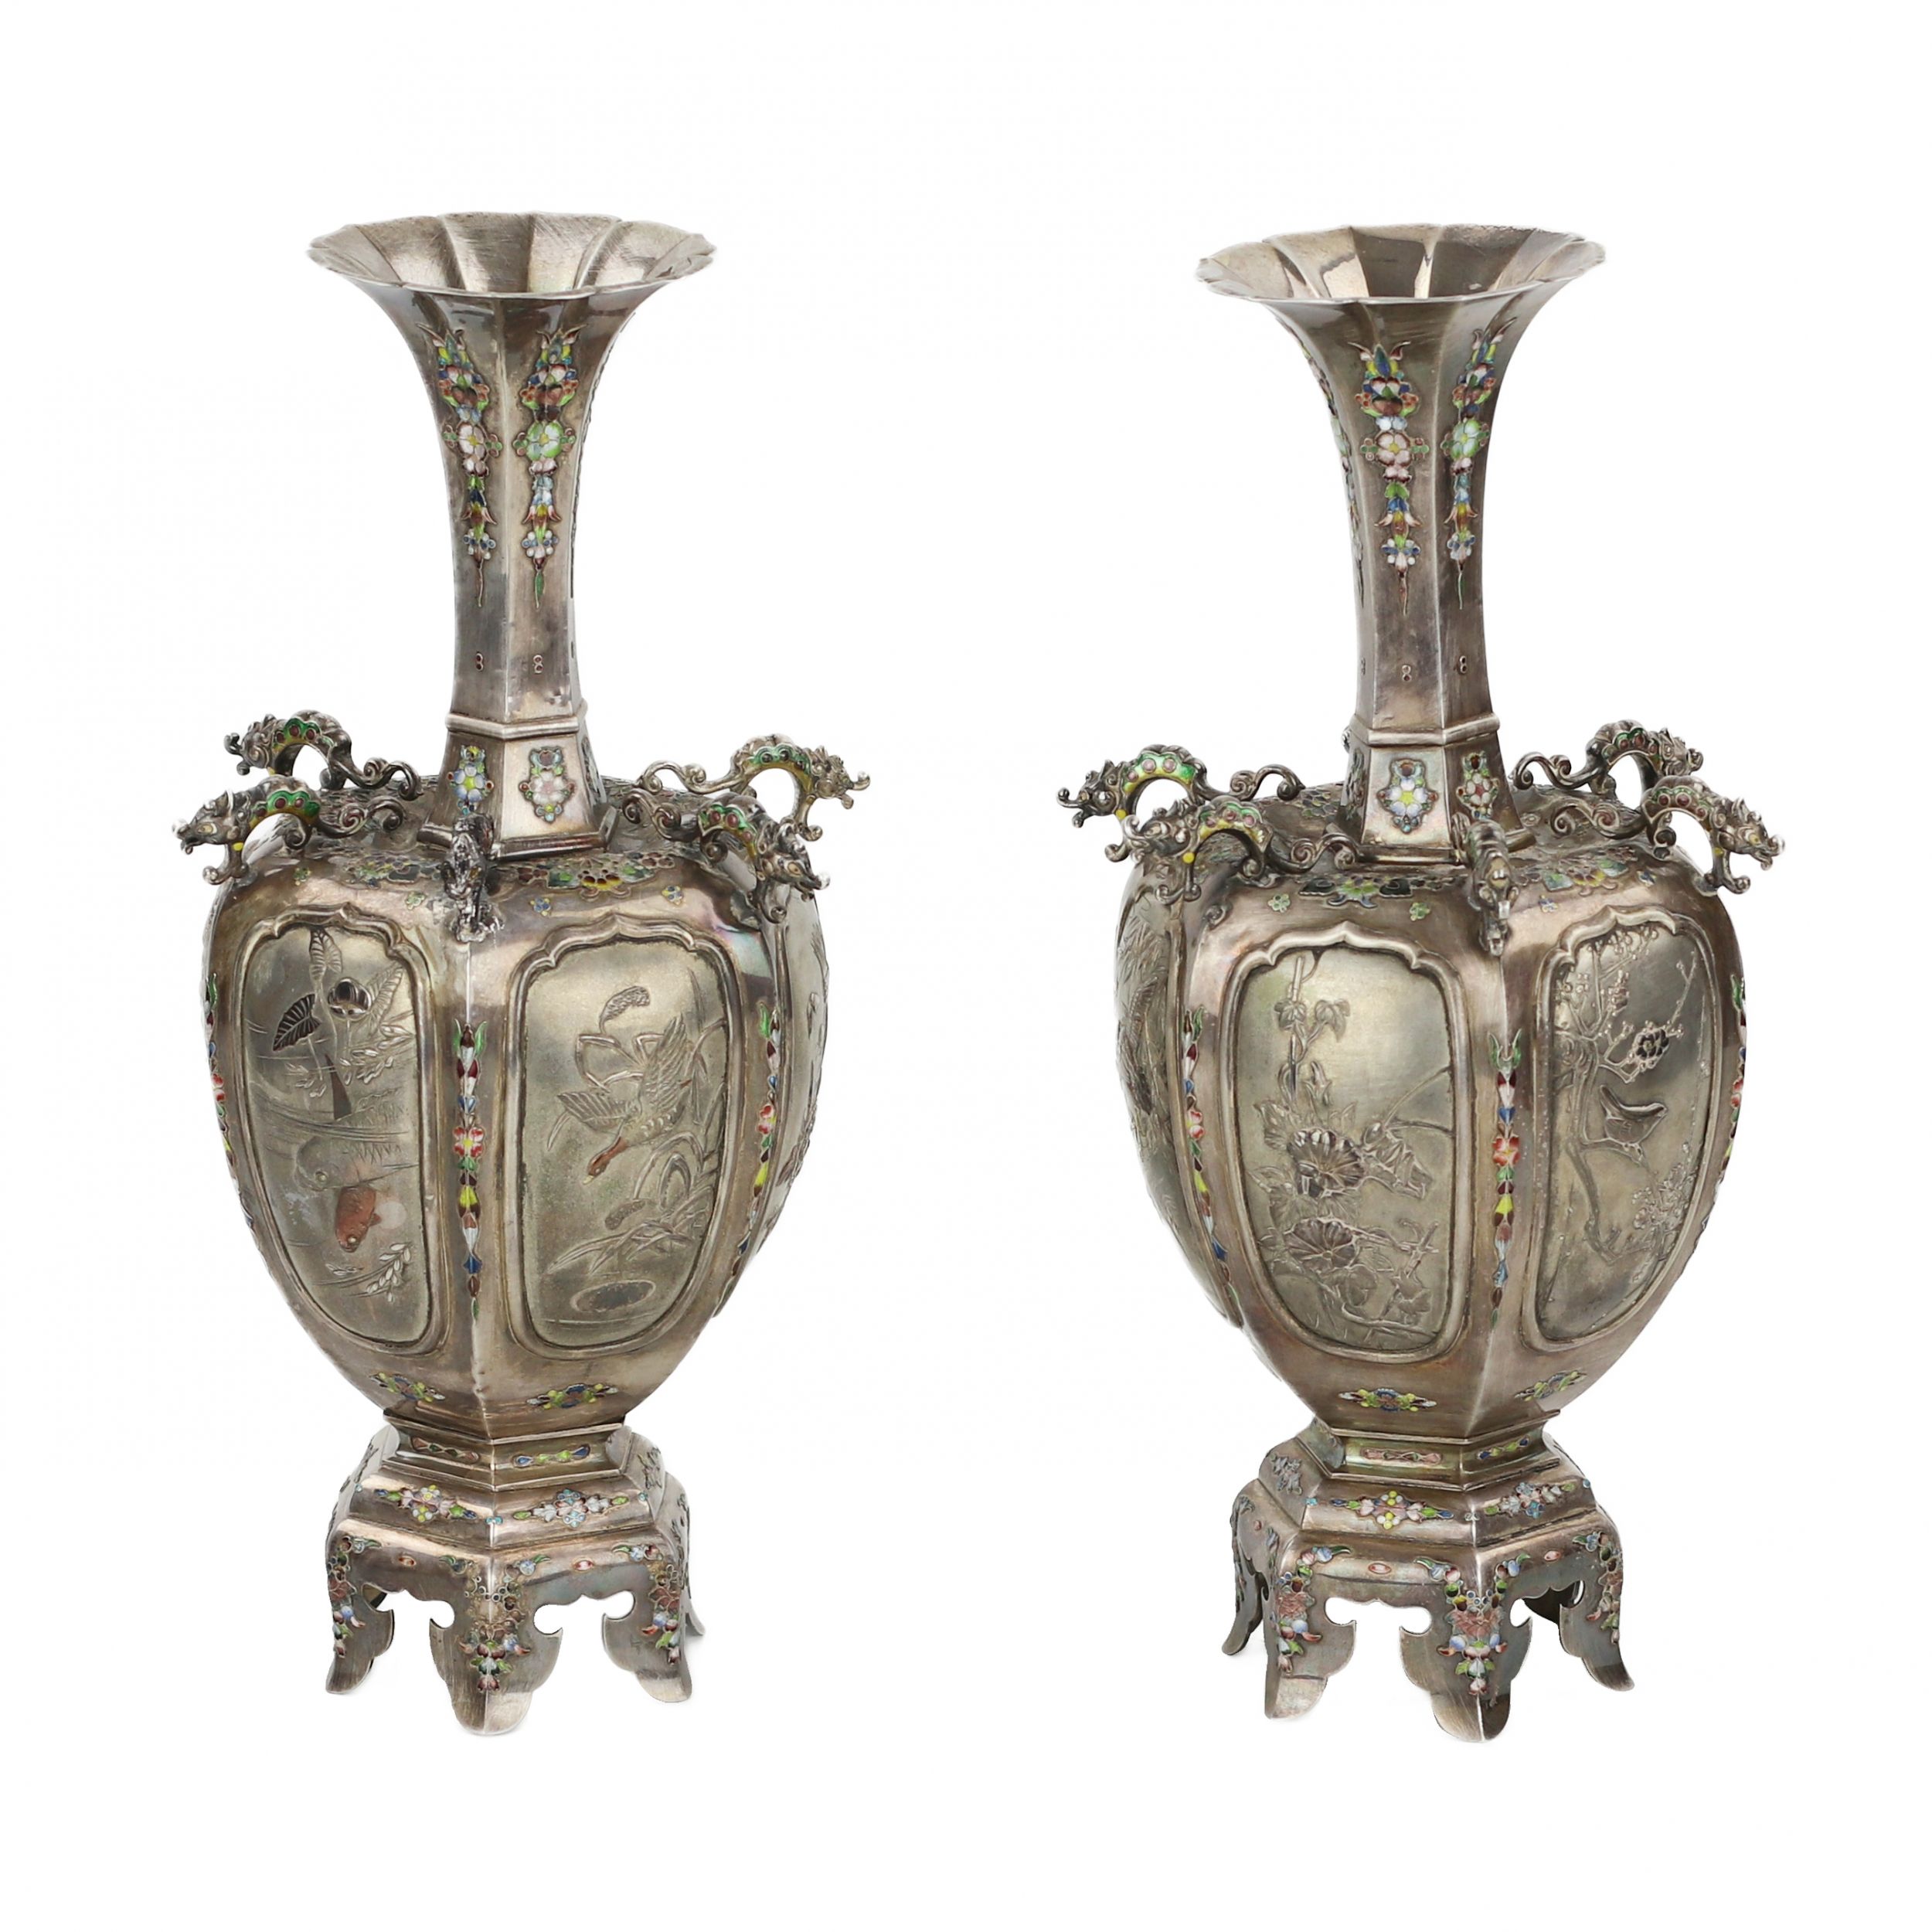 A pair of elegant Japanese vases made of silver and enamel. The turn of the 19th-20th centuries. - Bild 2 aus 6